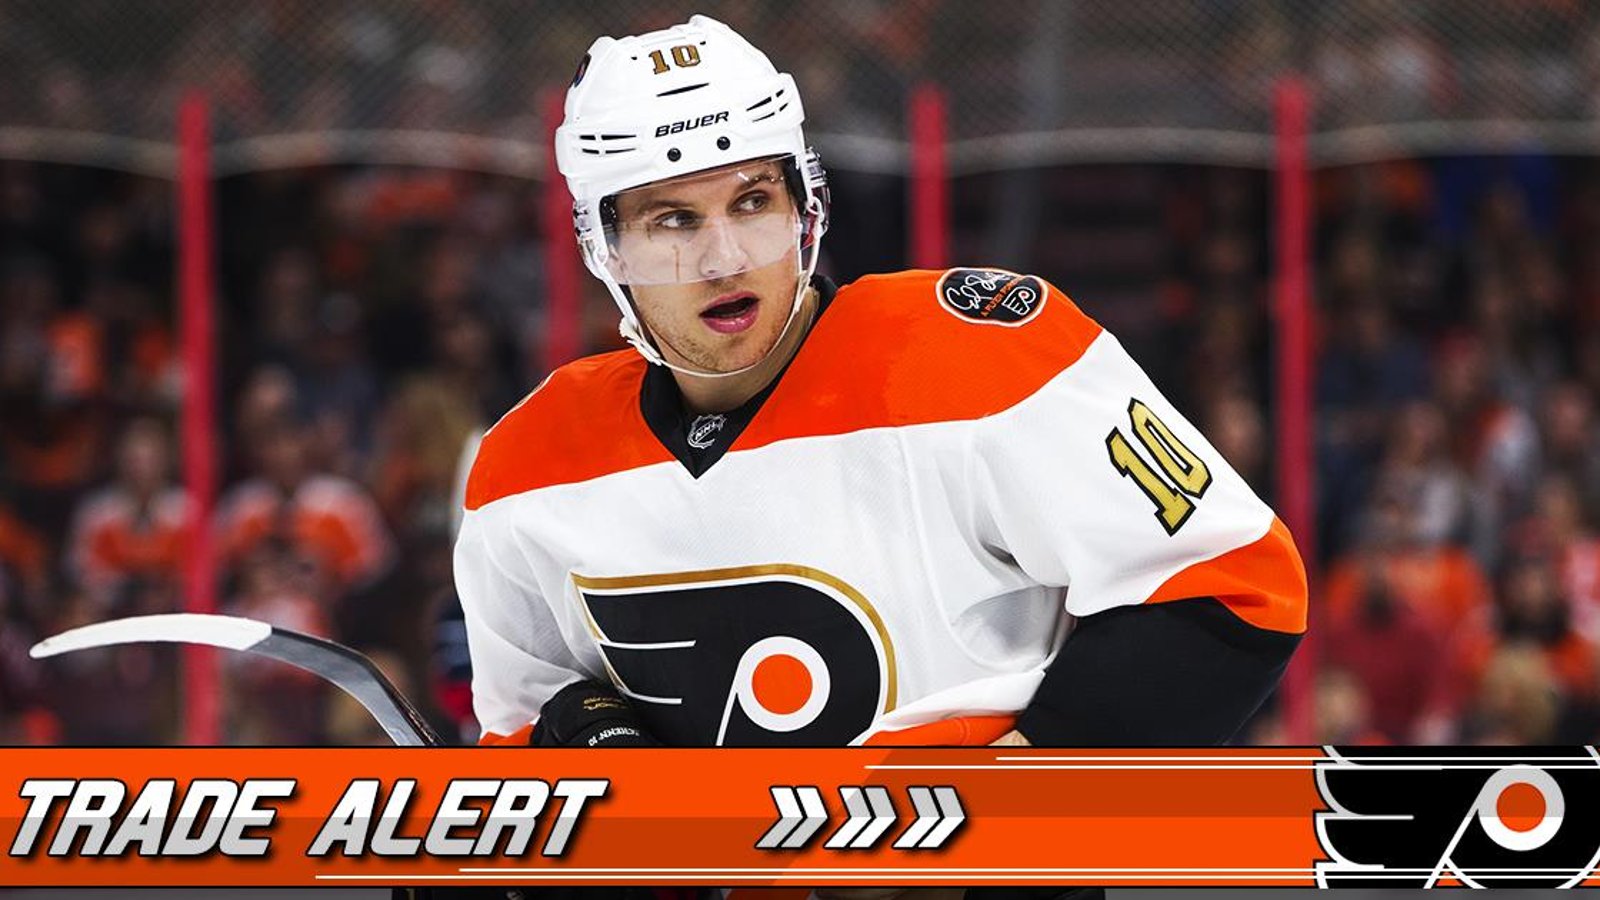 Breaking: Ron Hextall makes a stunning trade at the NHL draft!